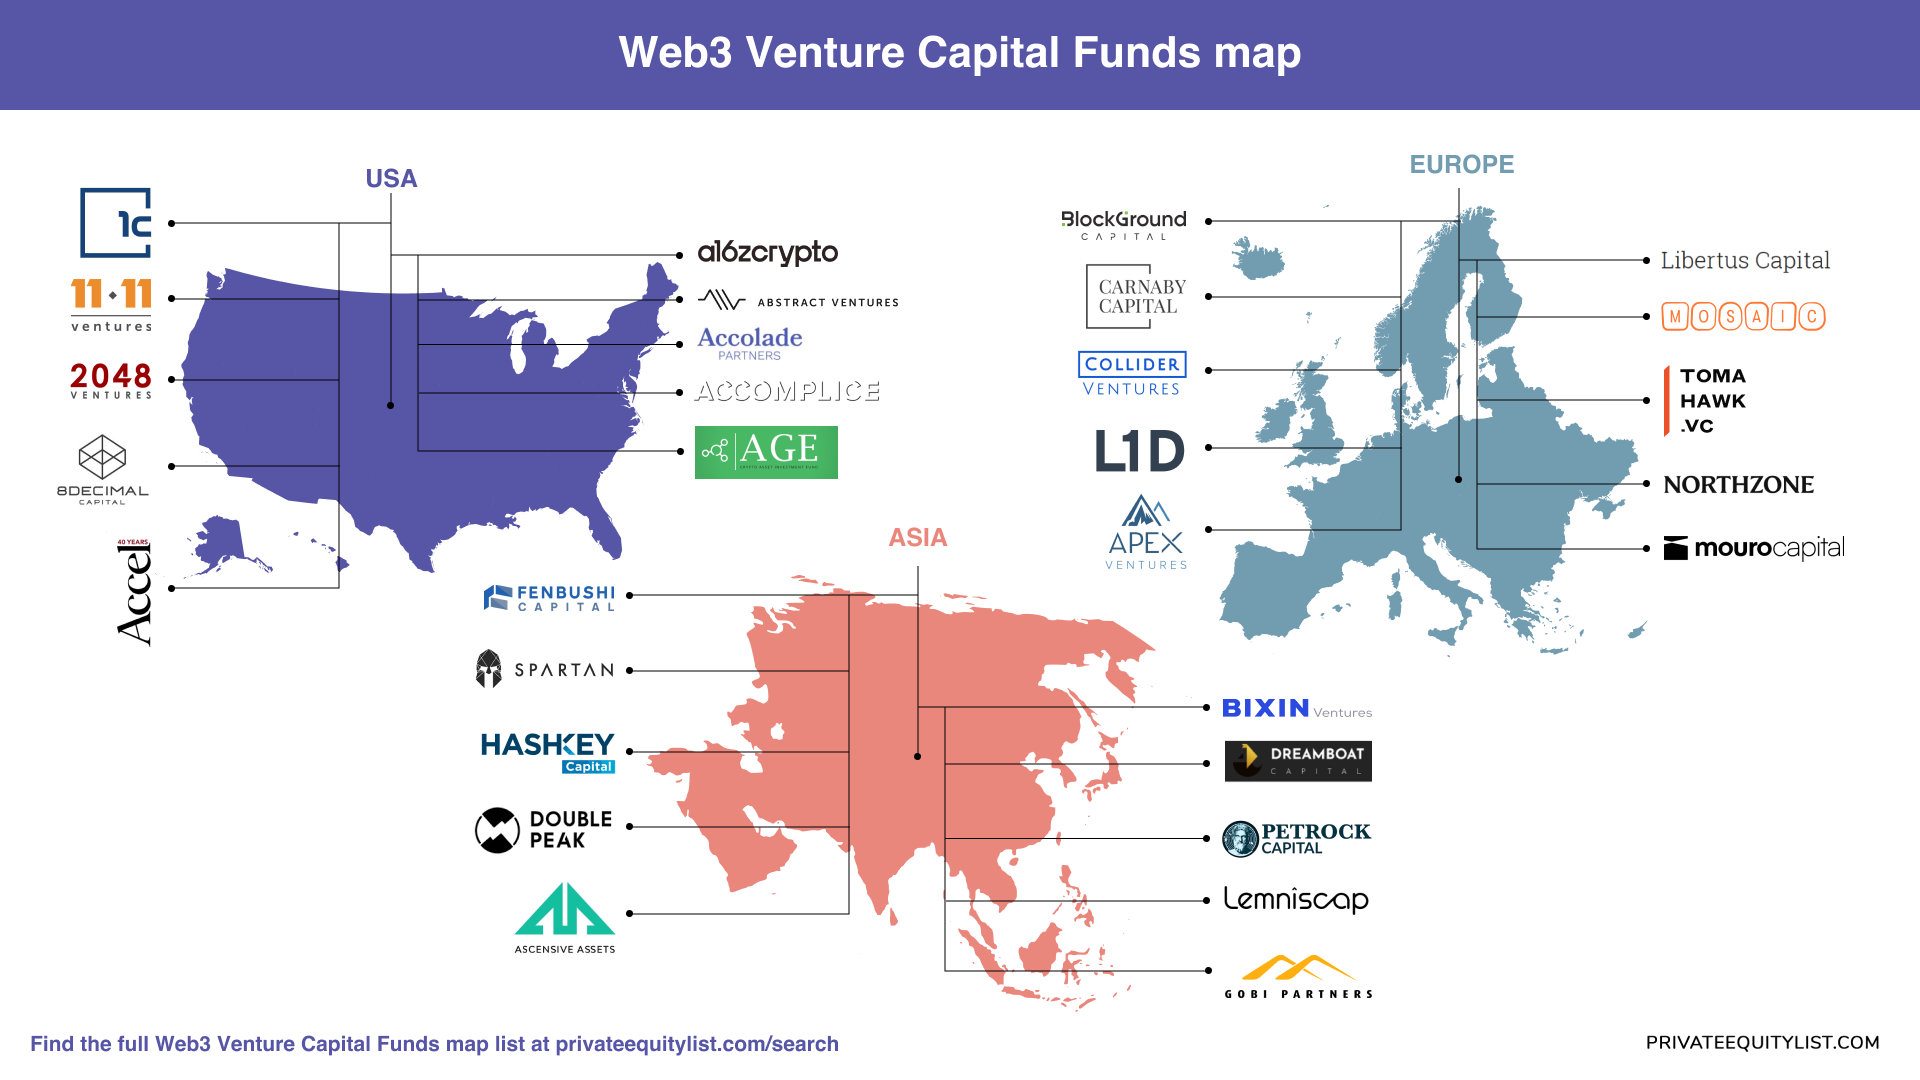 Web3 Venture Capital Funds in the US, Europe and Asia: Overview